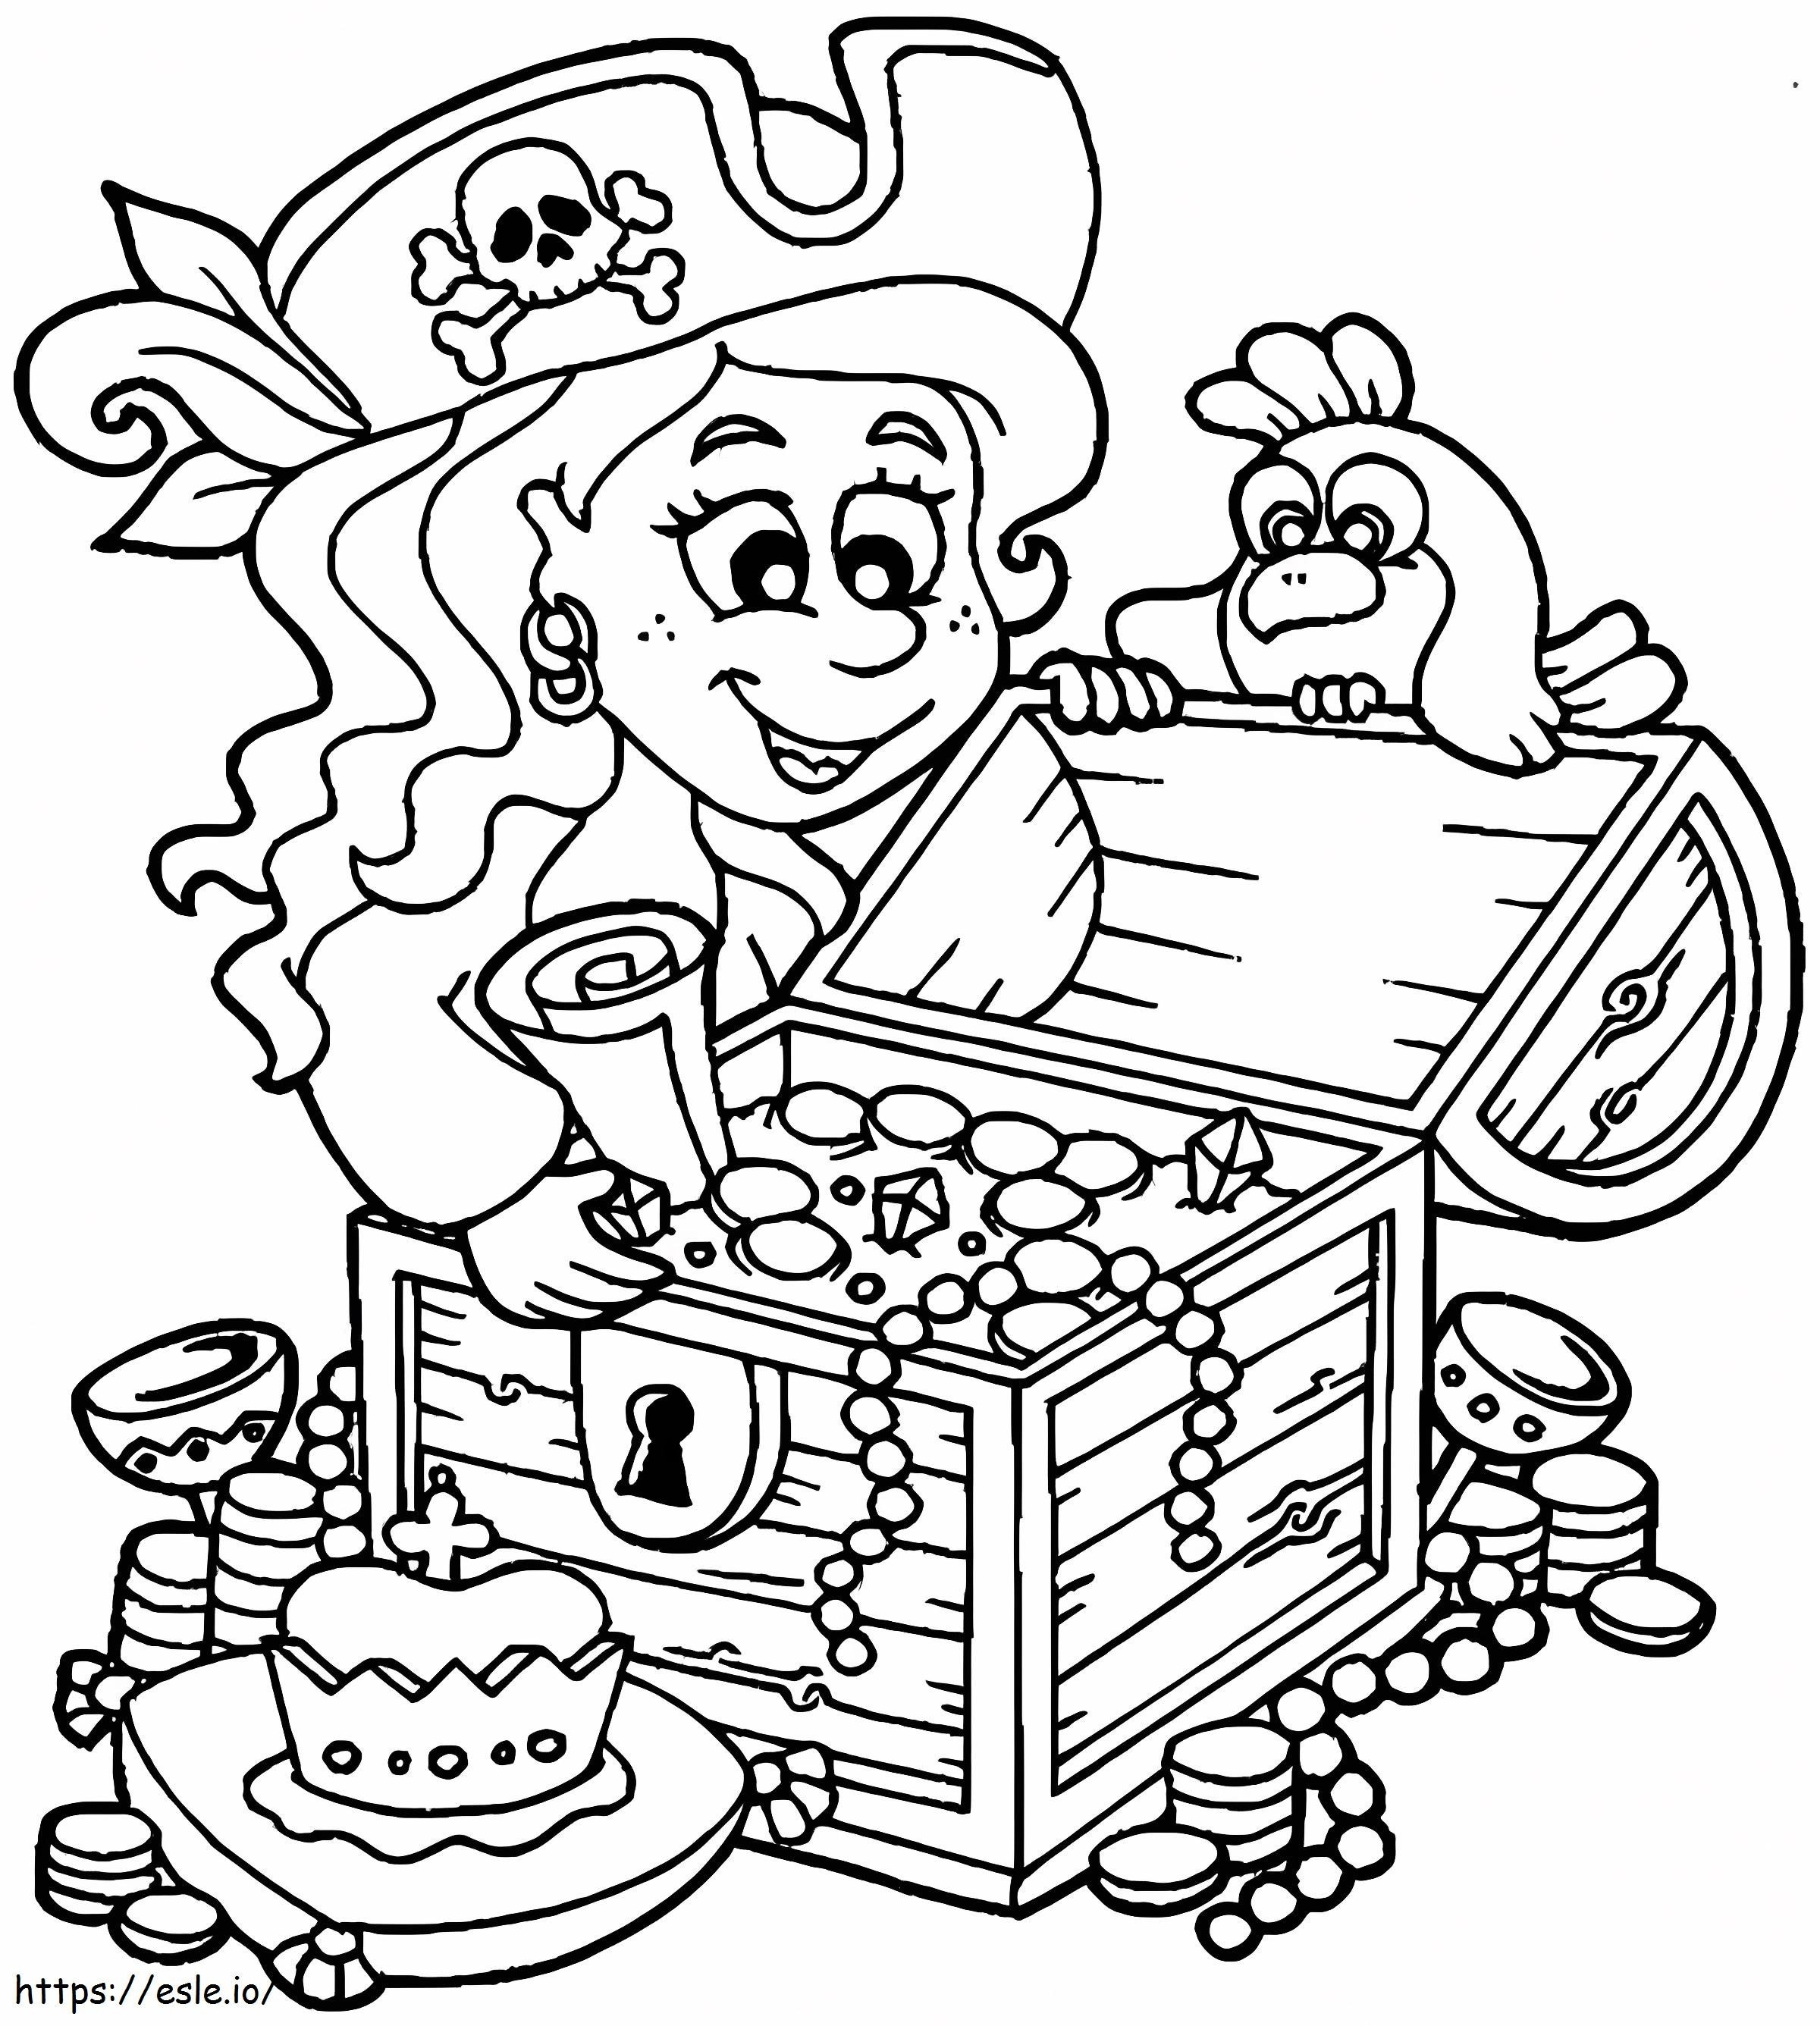 Pirate Girl With Treasure Chest coloring page